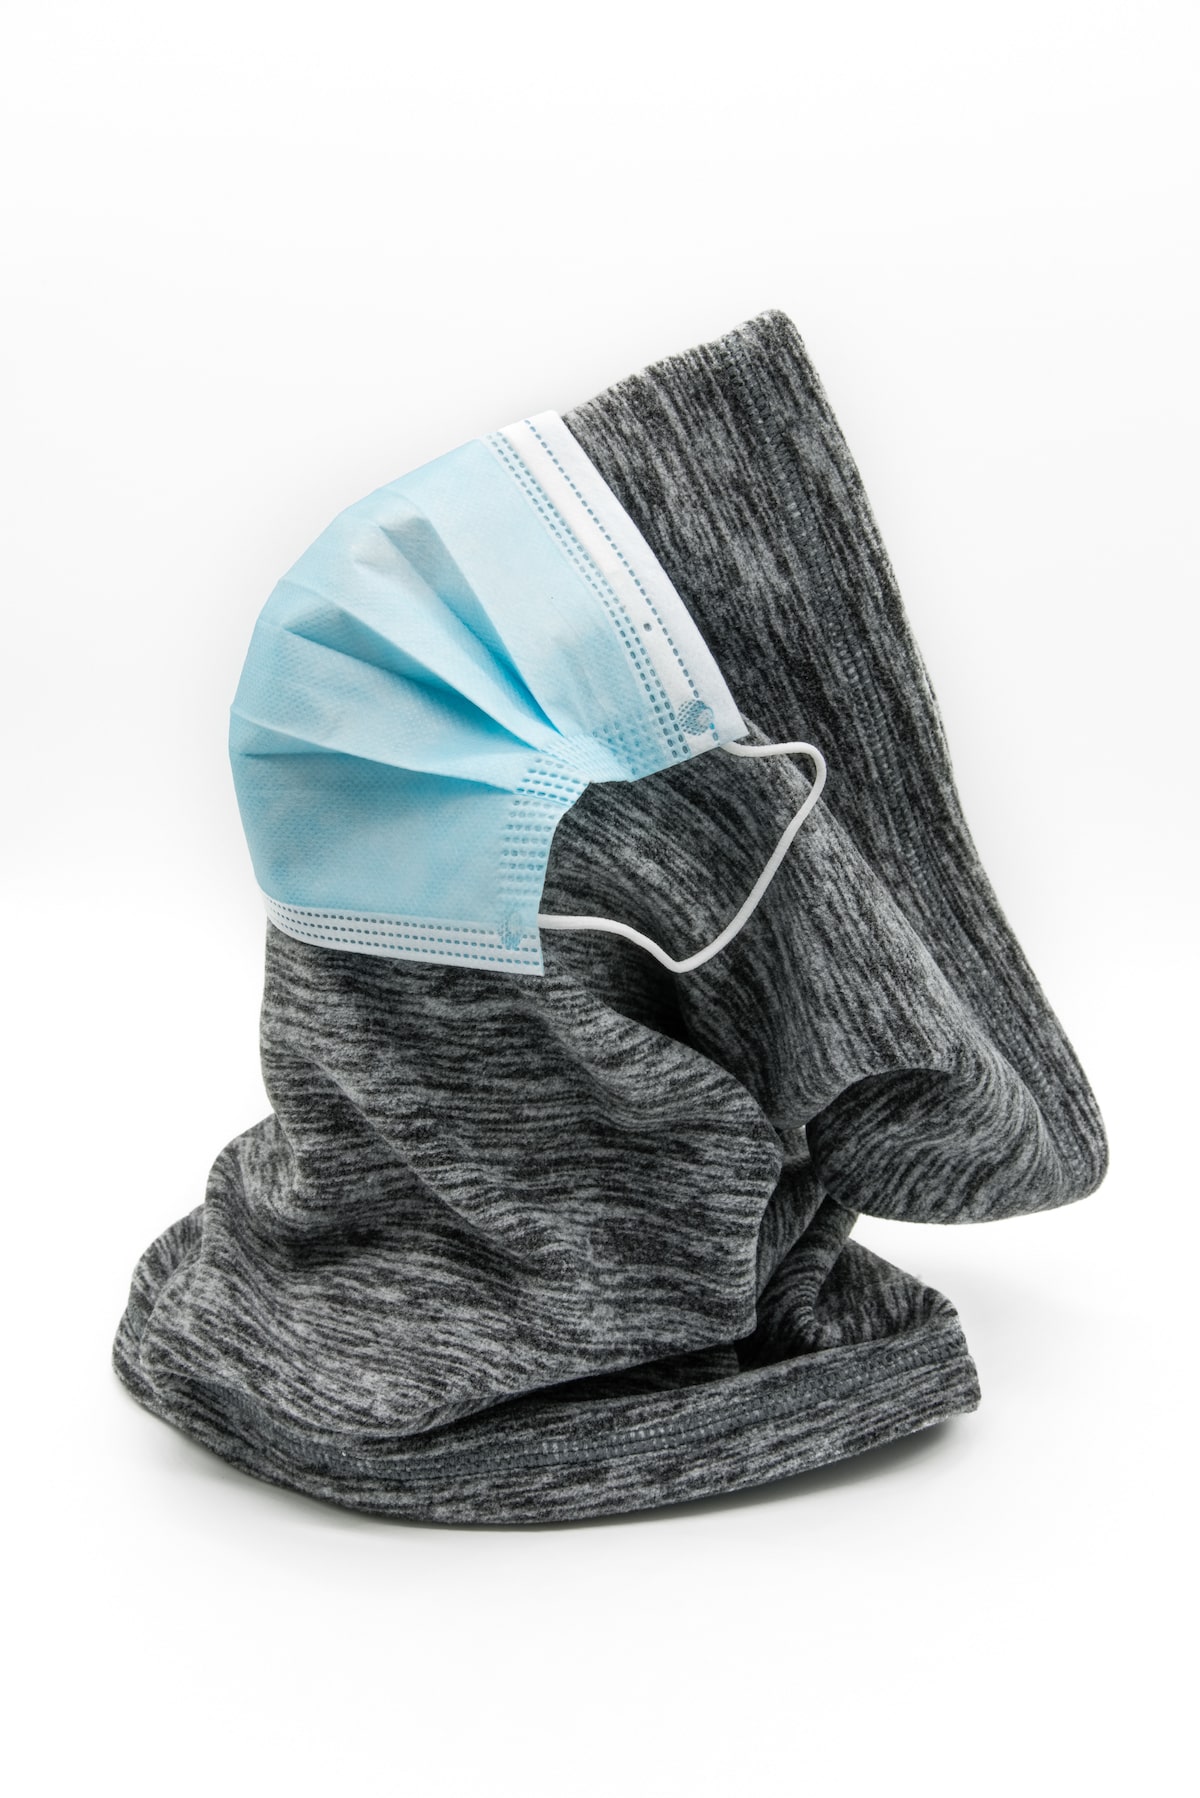 See You Later, Neck Gaiter? No, Maybe It's OK as Mask | Hartford HealthCare |